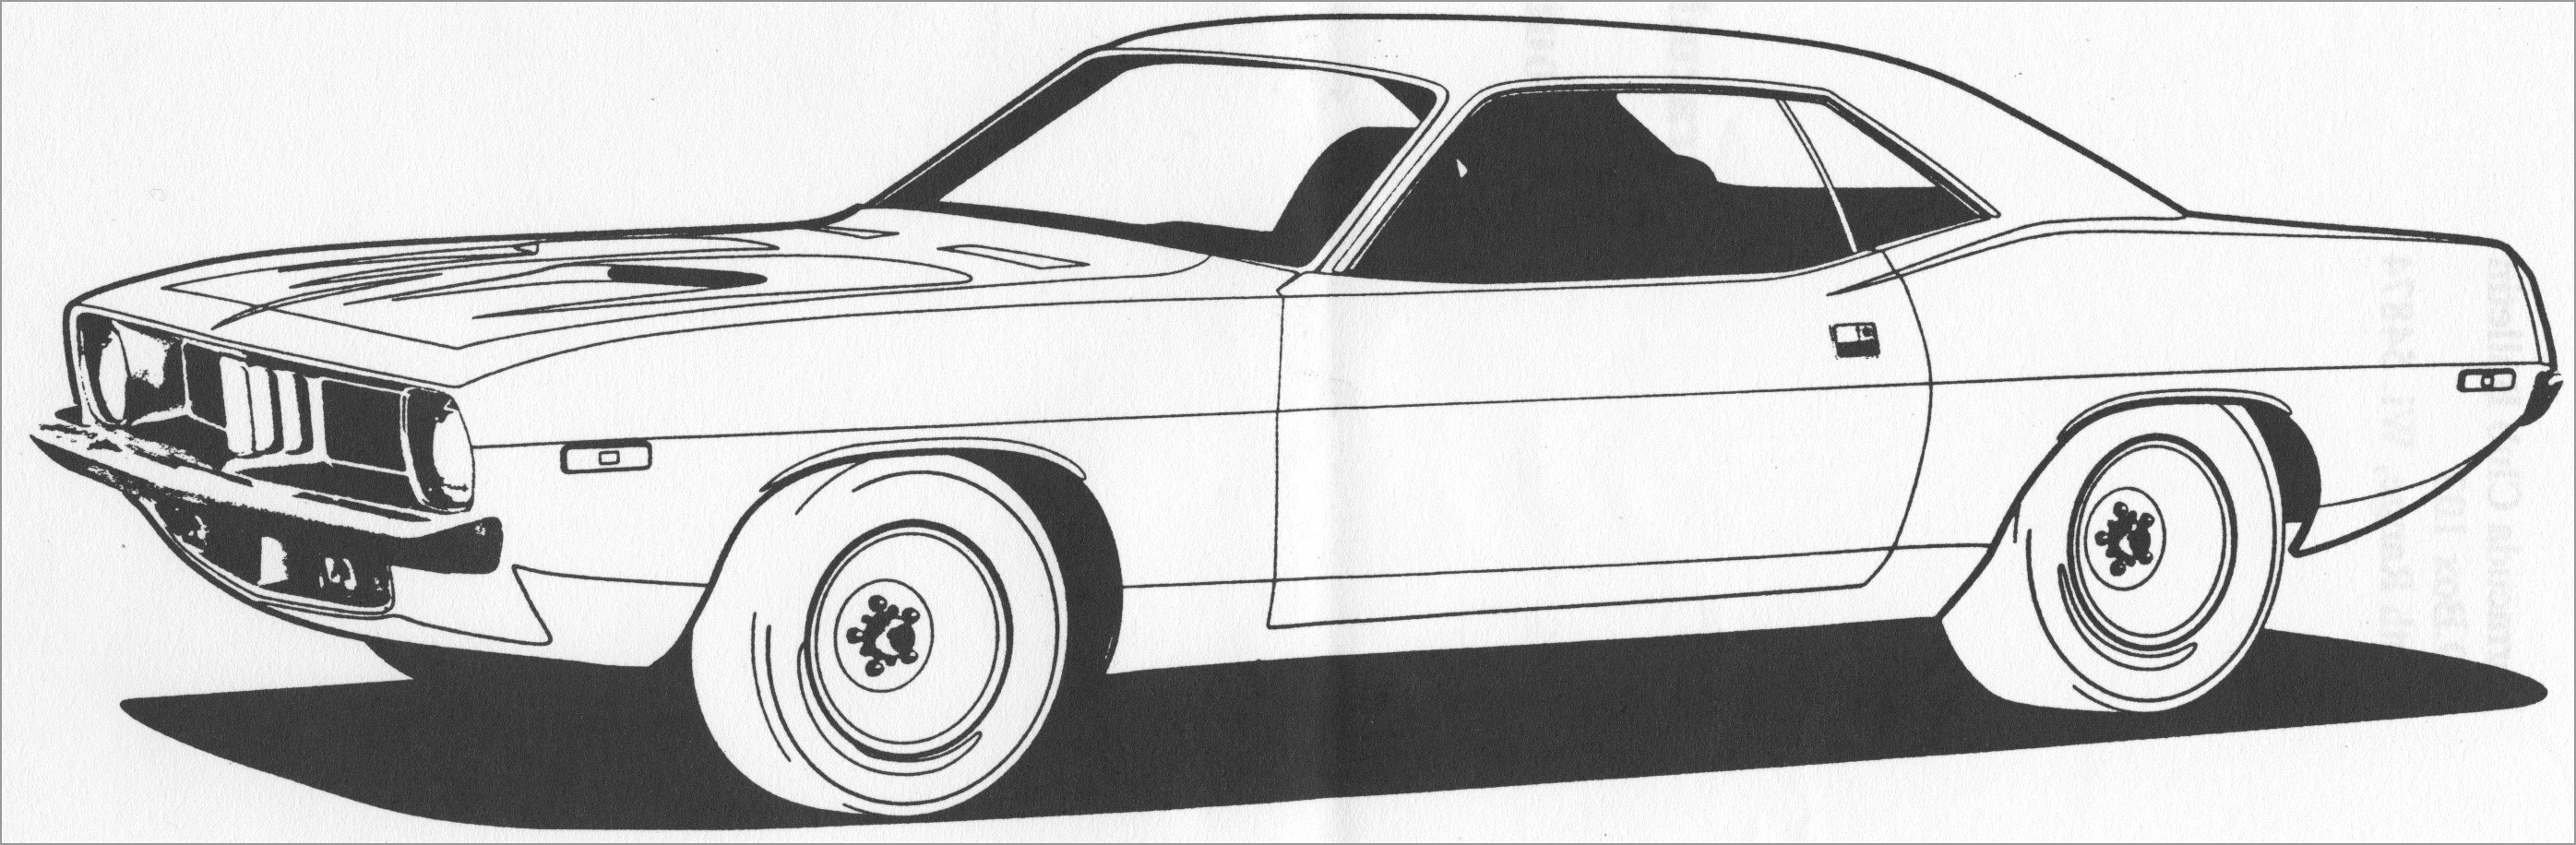 Coloring Page Of Classic Car